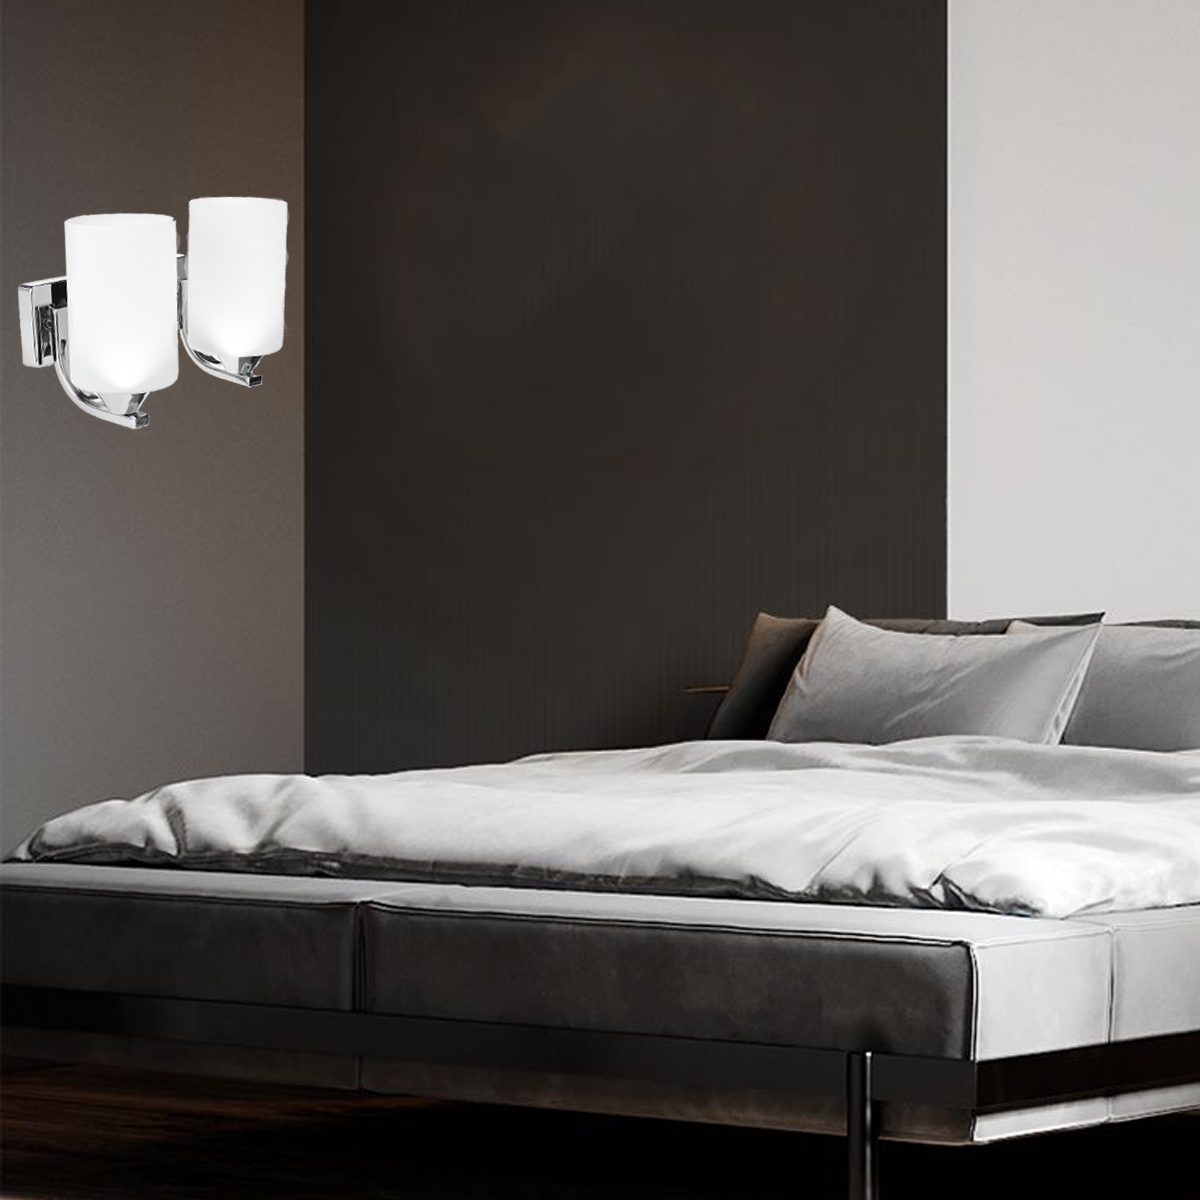 Bedroom-Glass-Wall-Sconce-Light-Indoor-Fixture-Bedside-LampLED-Bulb-Pull-Switch-1763737-6